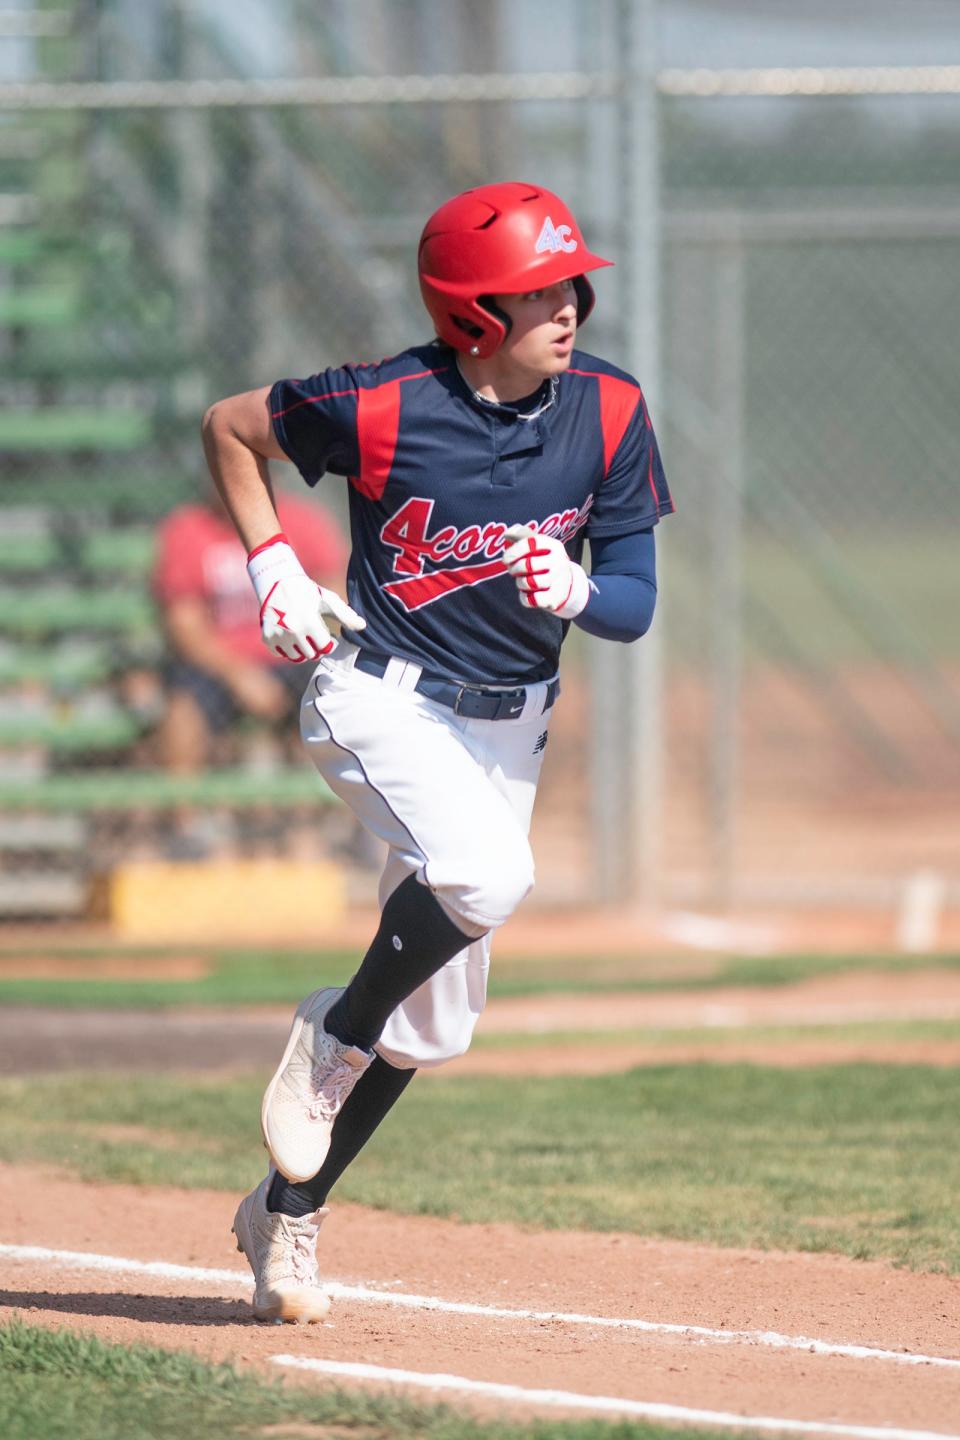 Bryant Elliot runs to first base during a day one game against Cherry Creek at the annual Andenucio Memorial Baseball Tournament on Thursday, June 16, 2022.